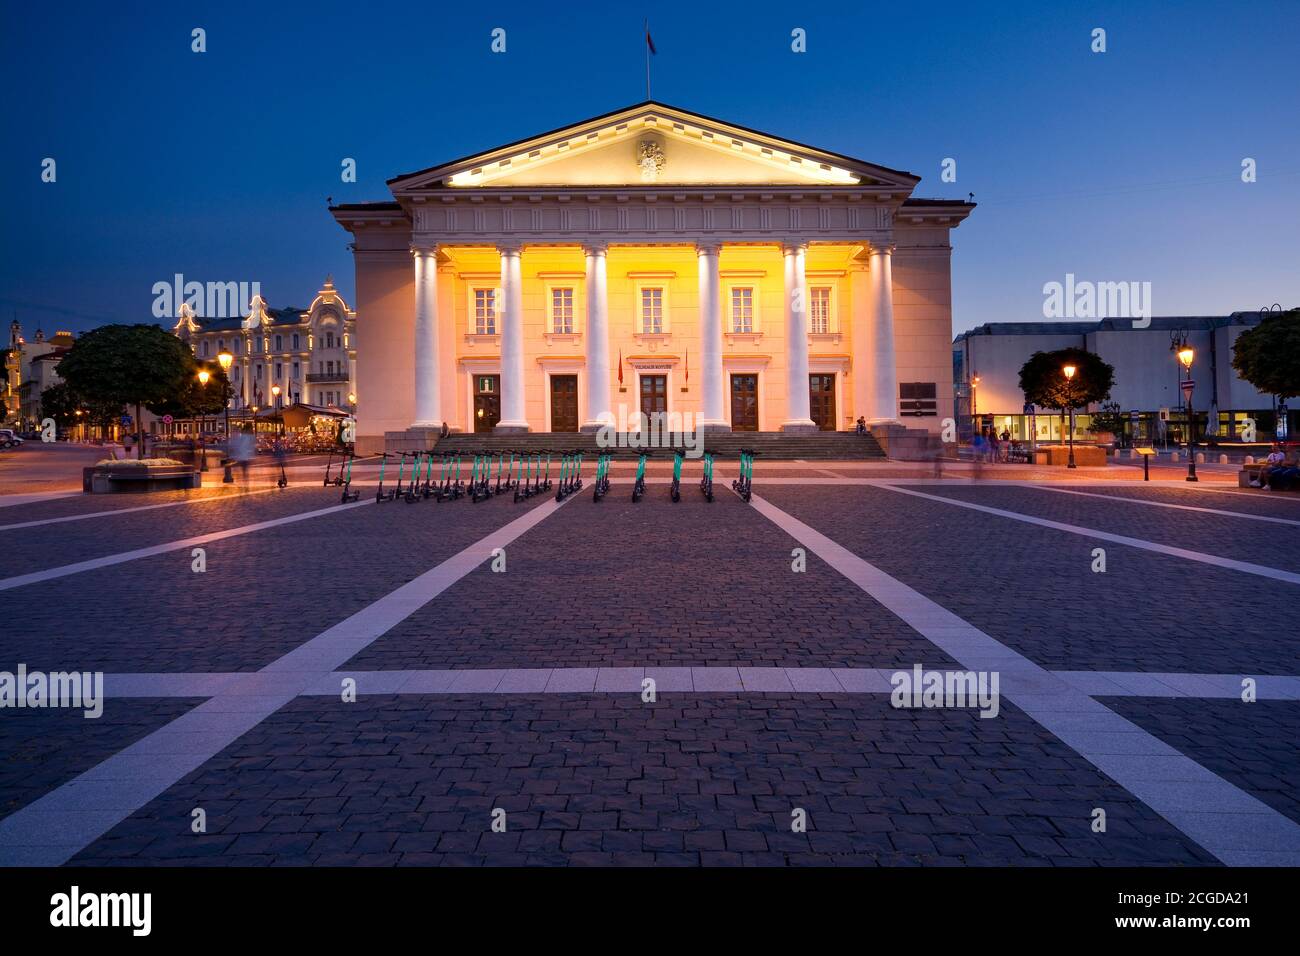 Night view of illuminated Town Hall in the Town Hall Square in the Old Town of Vilnius, Lithuania Stock Photo